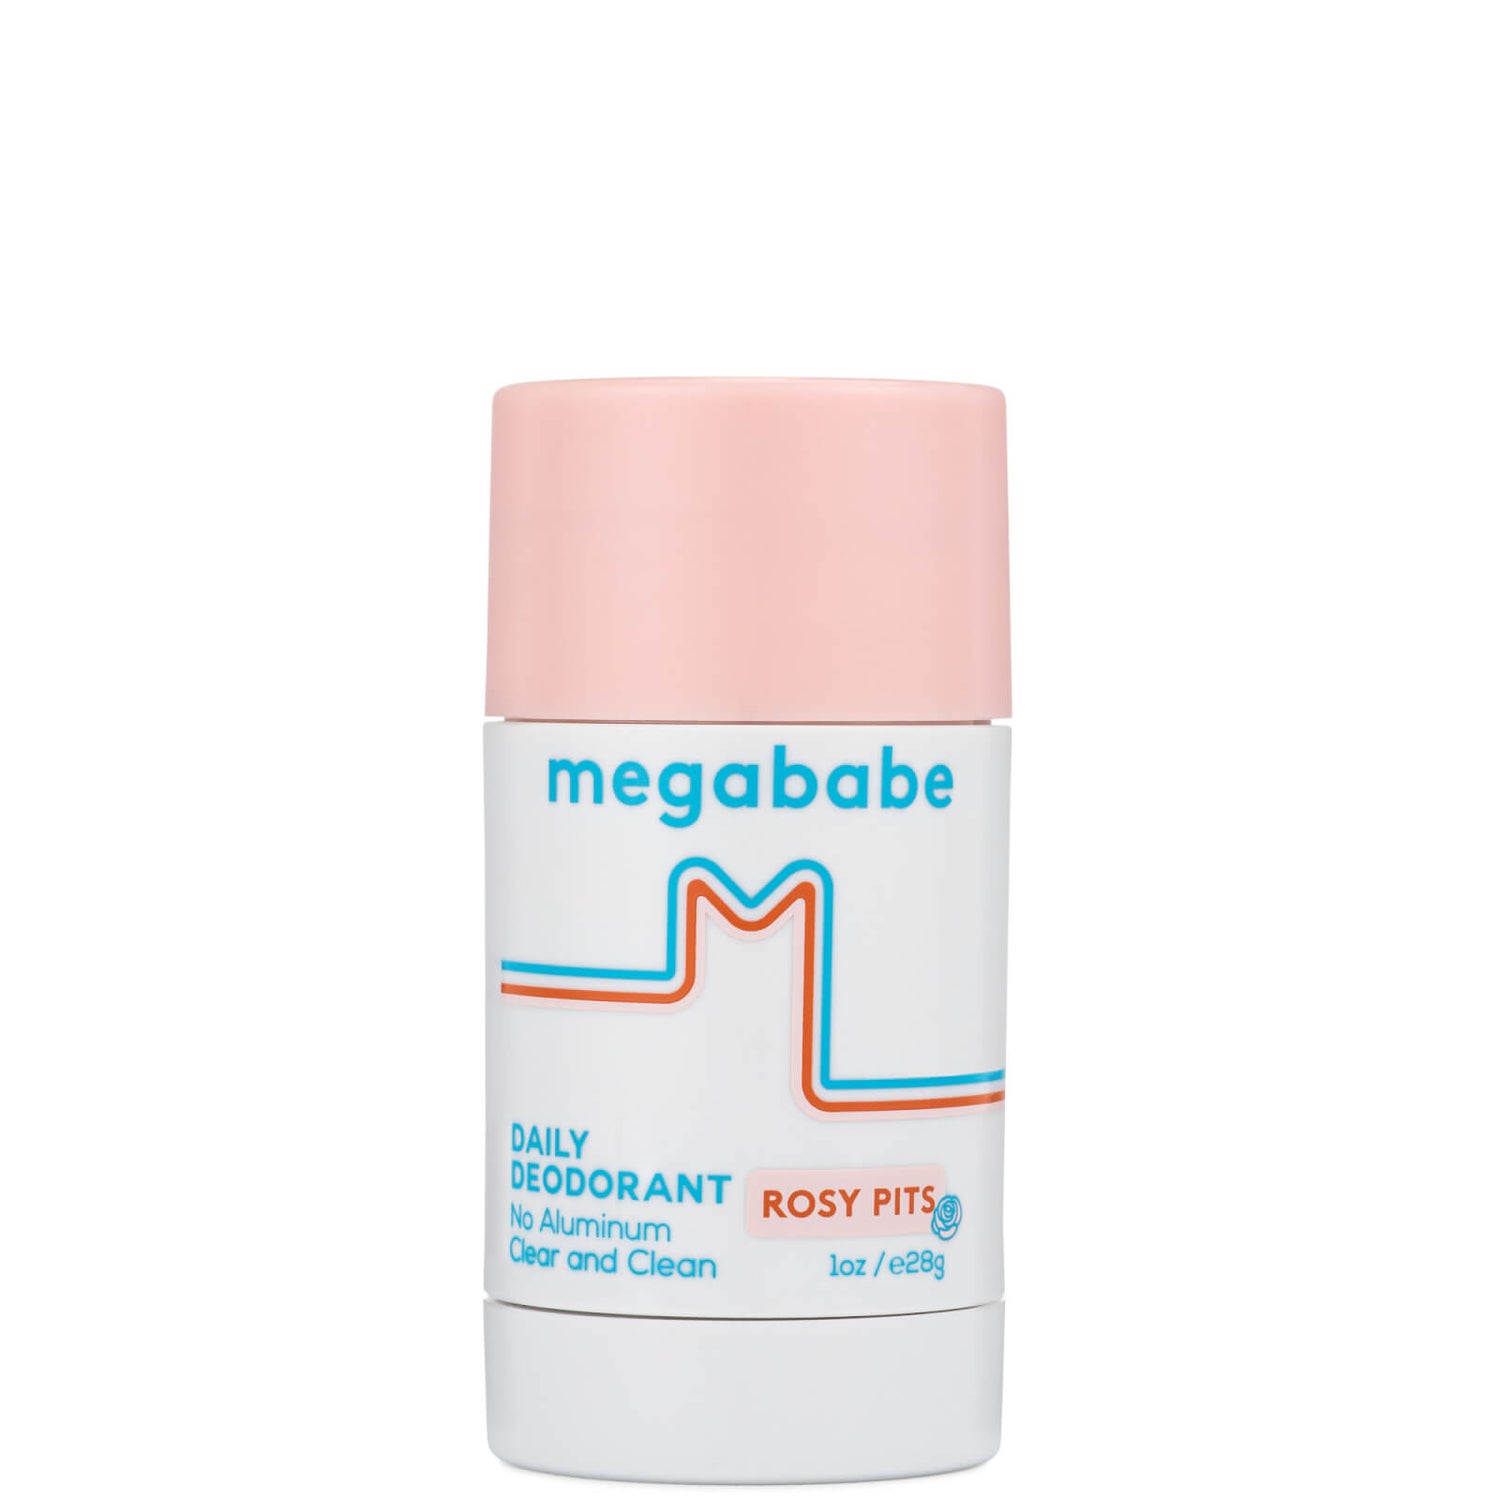 Megababe Rosy Pits Daily Deodorant for sensitive skin